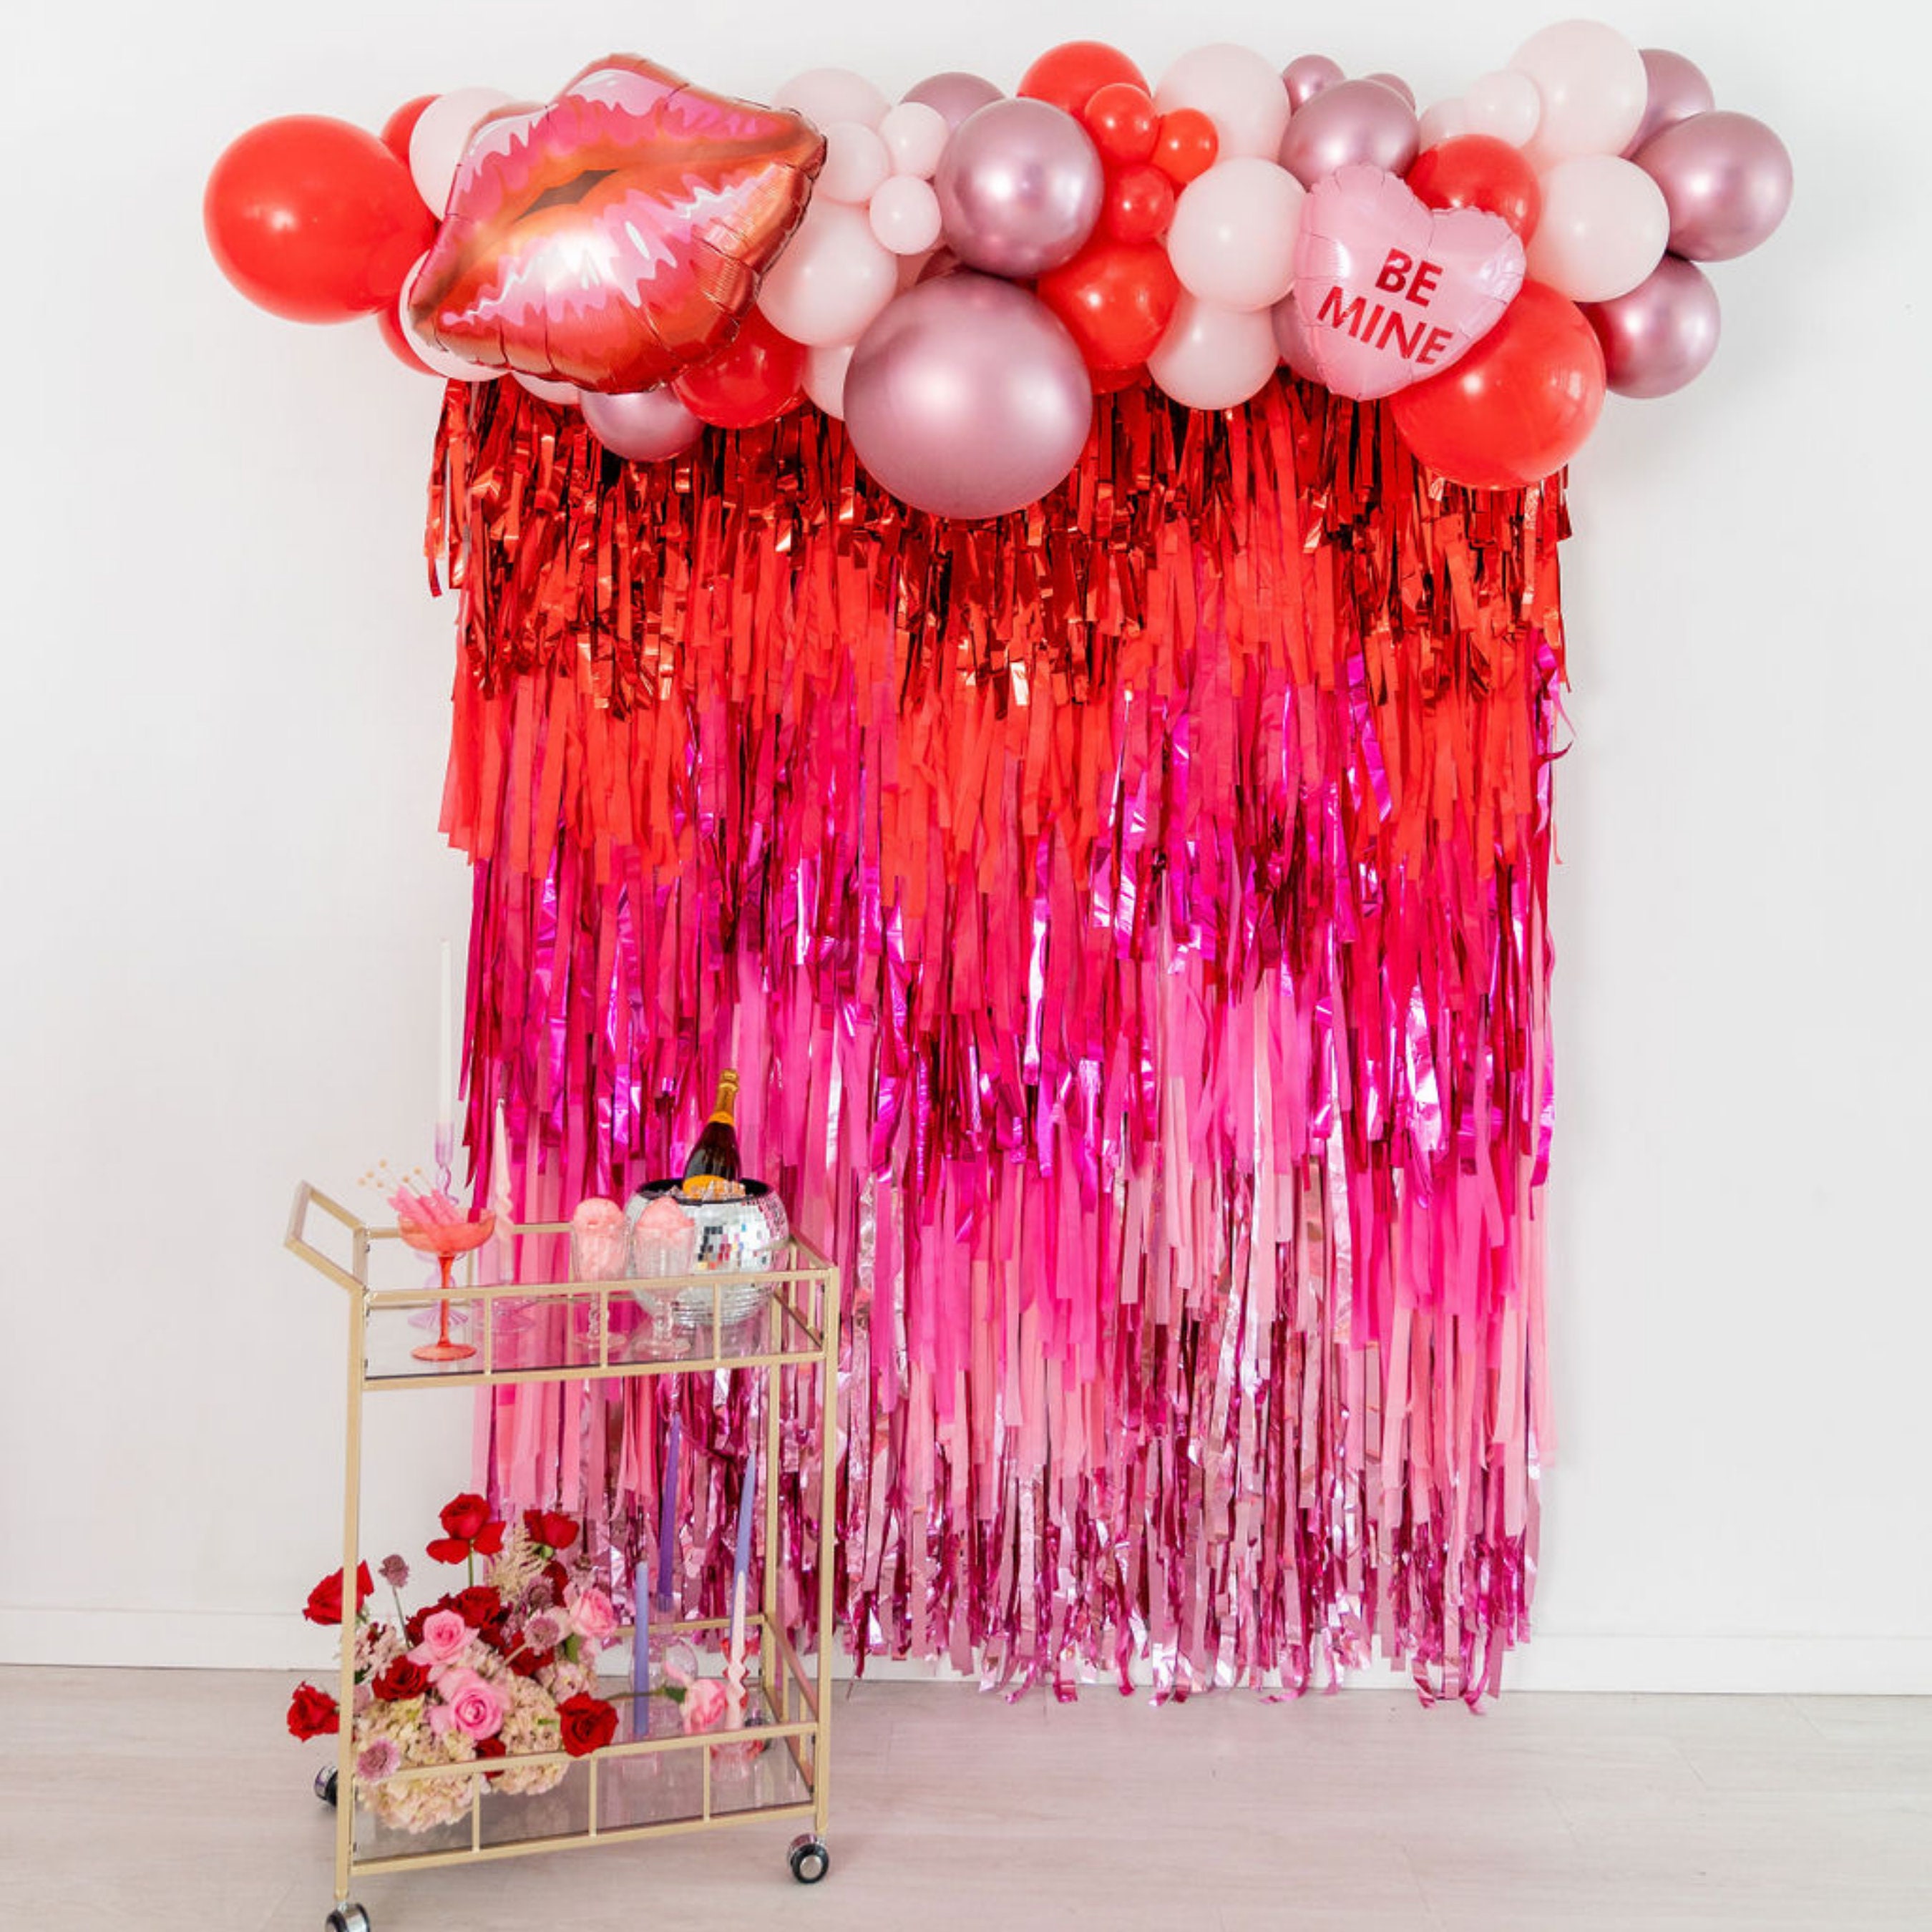 Valentine Balloons & Streamer Backdrop, Red, Gold, Pink Balloon Garland  With Streamers, Valentine's Day Decorations 